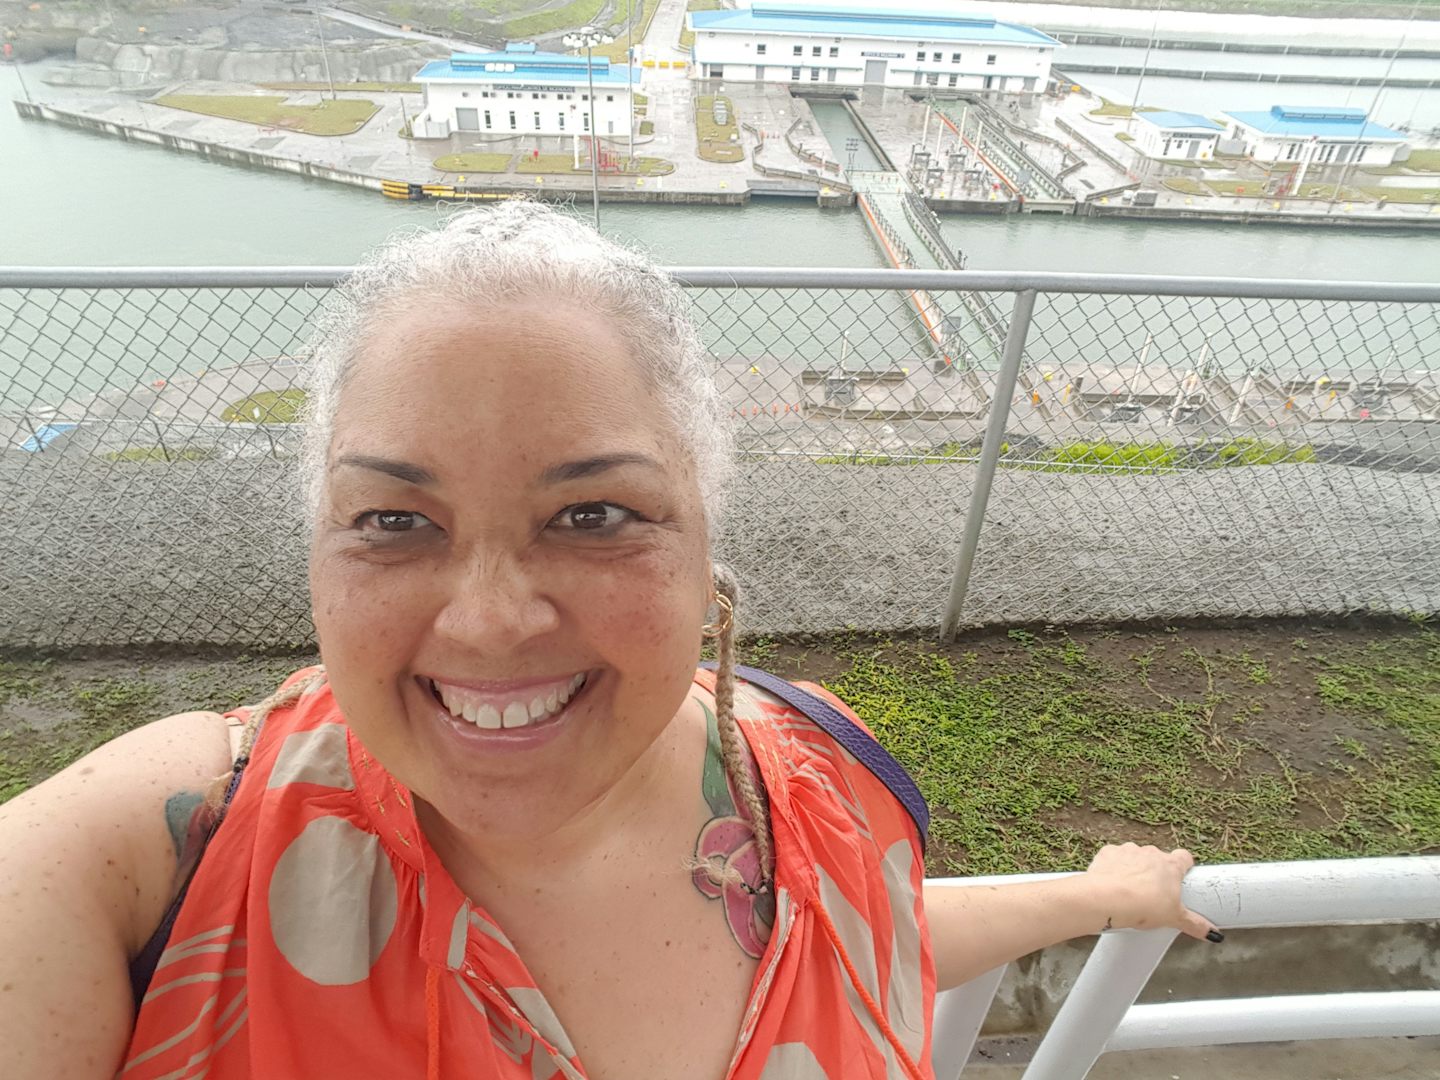 Me with the expansion locks of the Panama Canal in the background